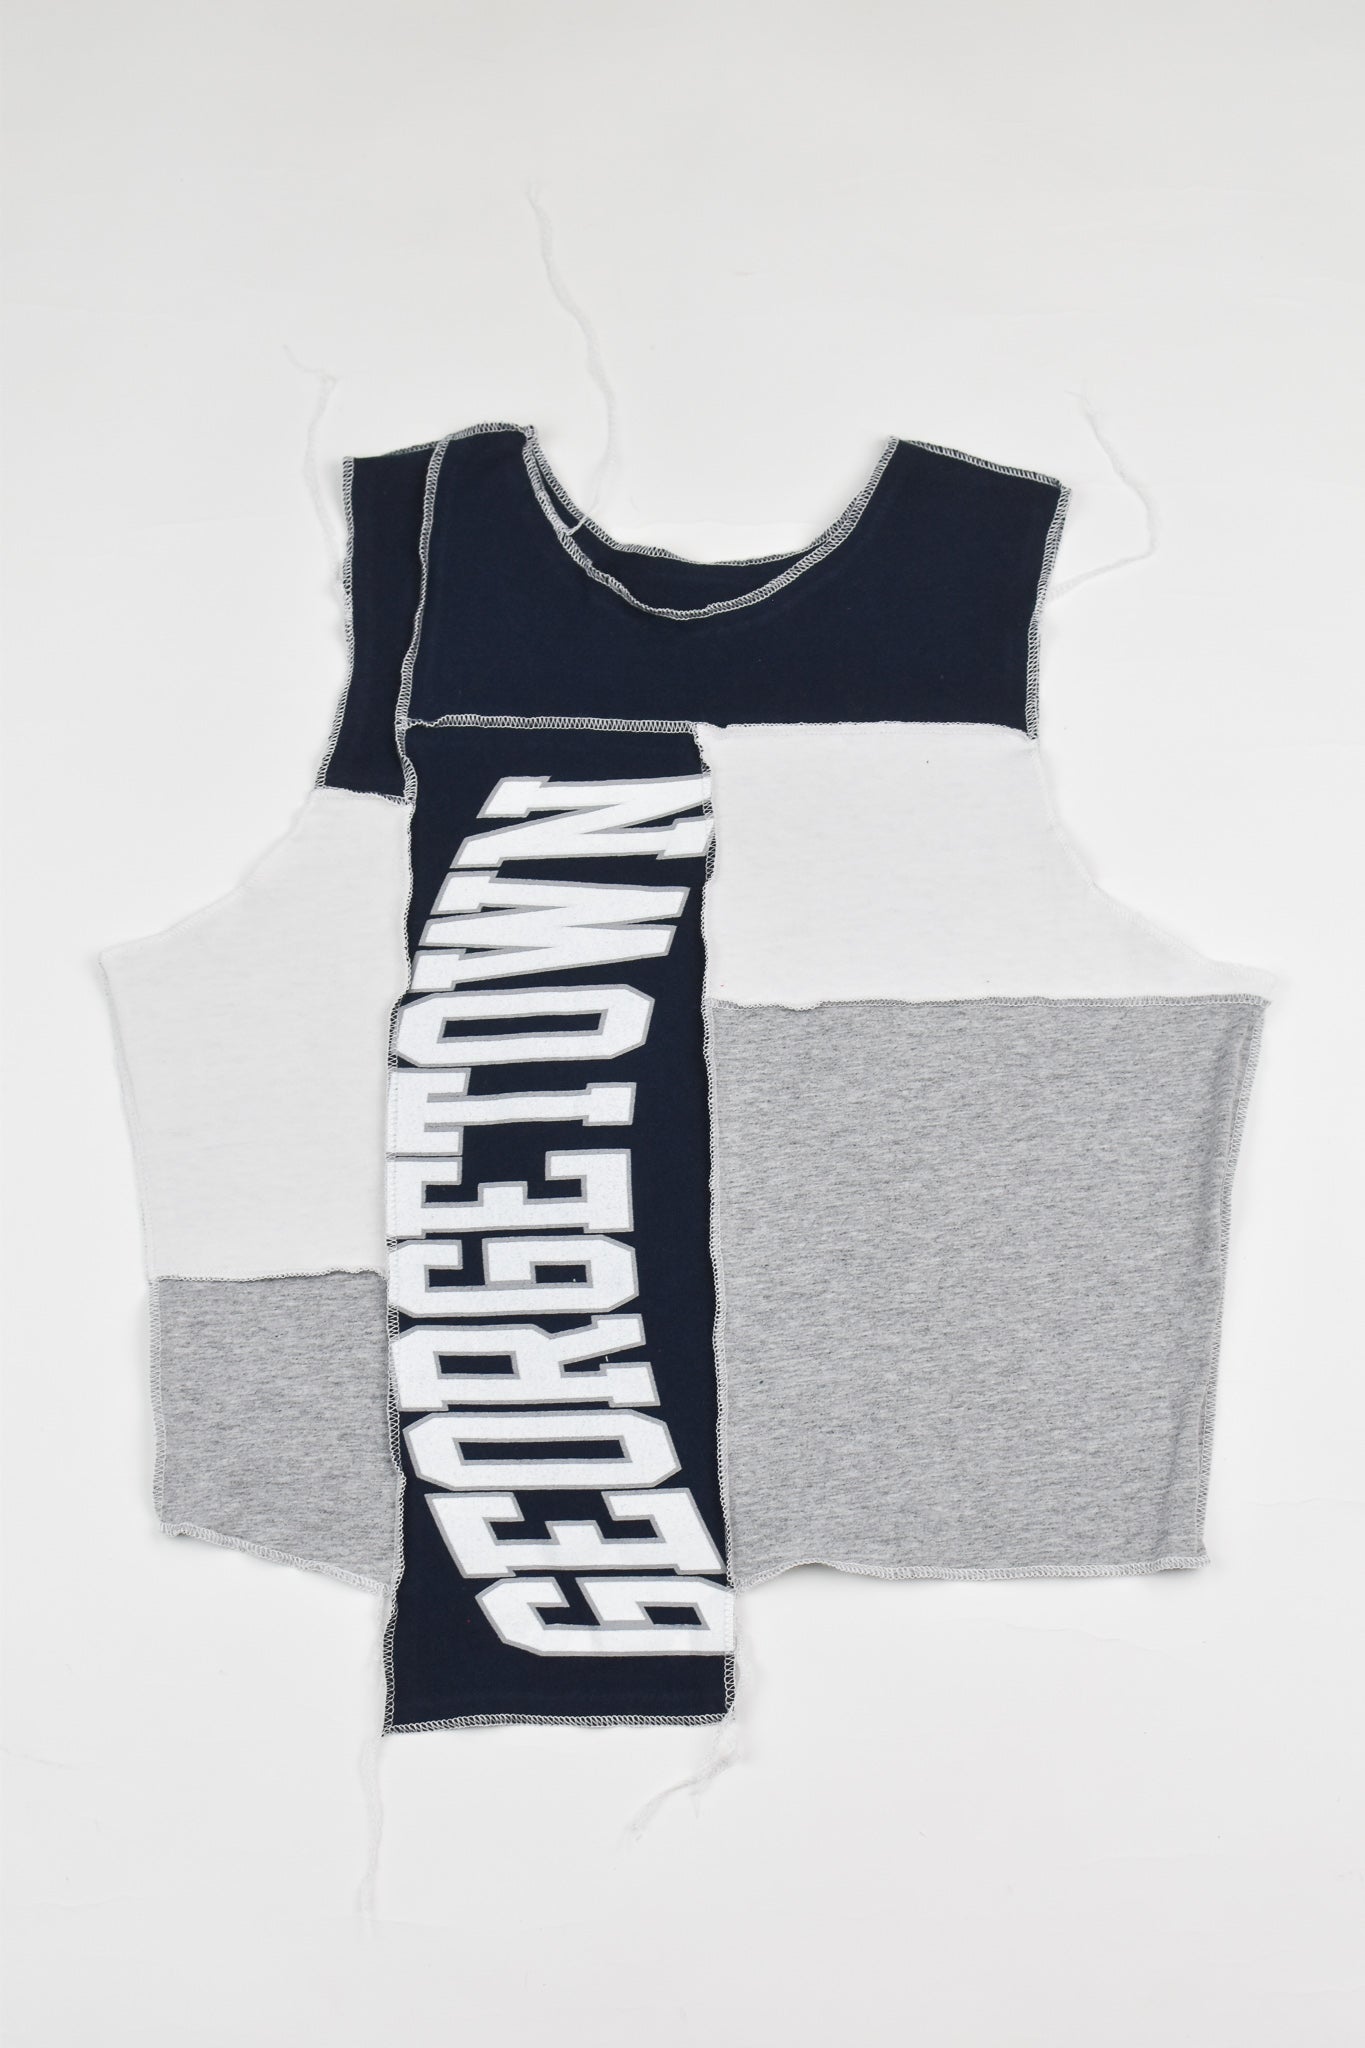 Upcycled Georgetown Scrappy Tank Top